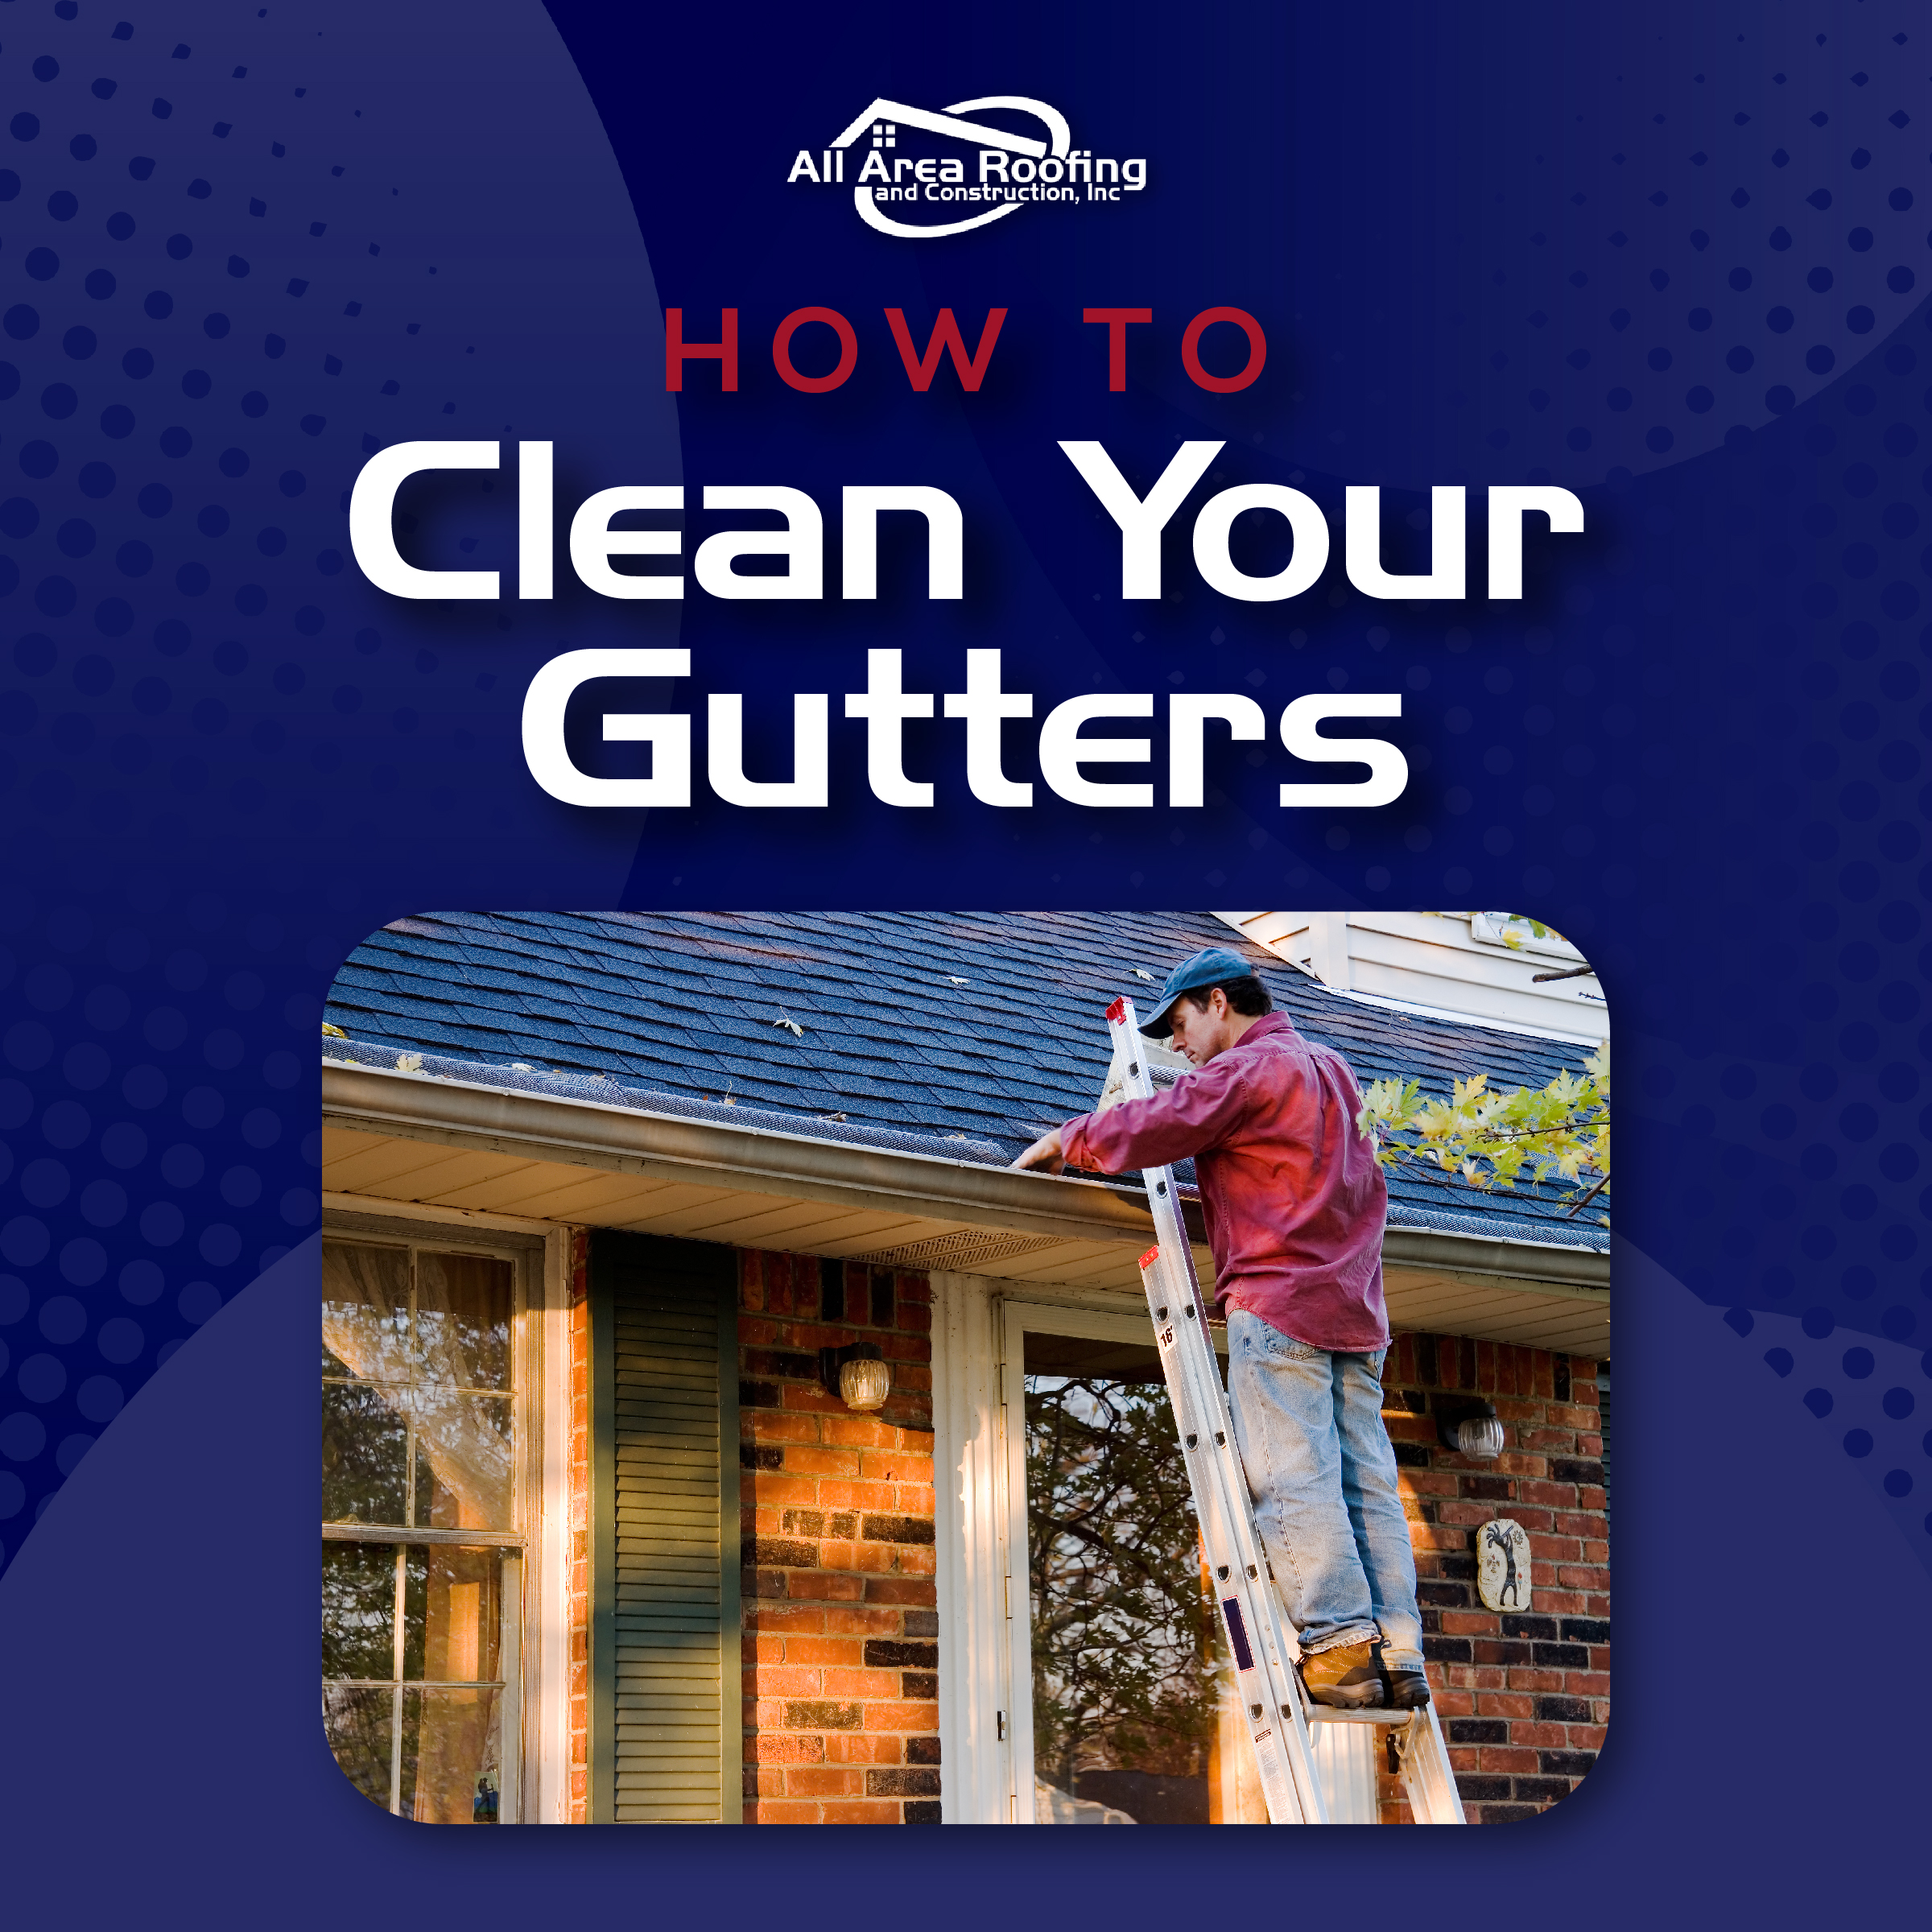 "How to Clean Your Gutters"